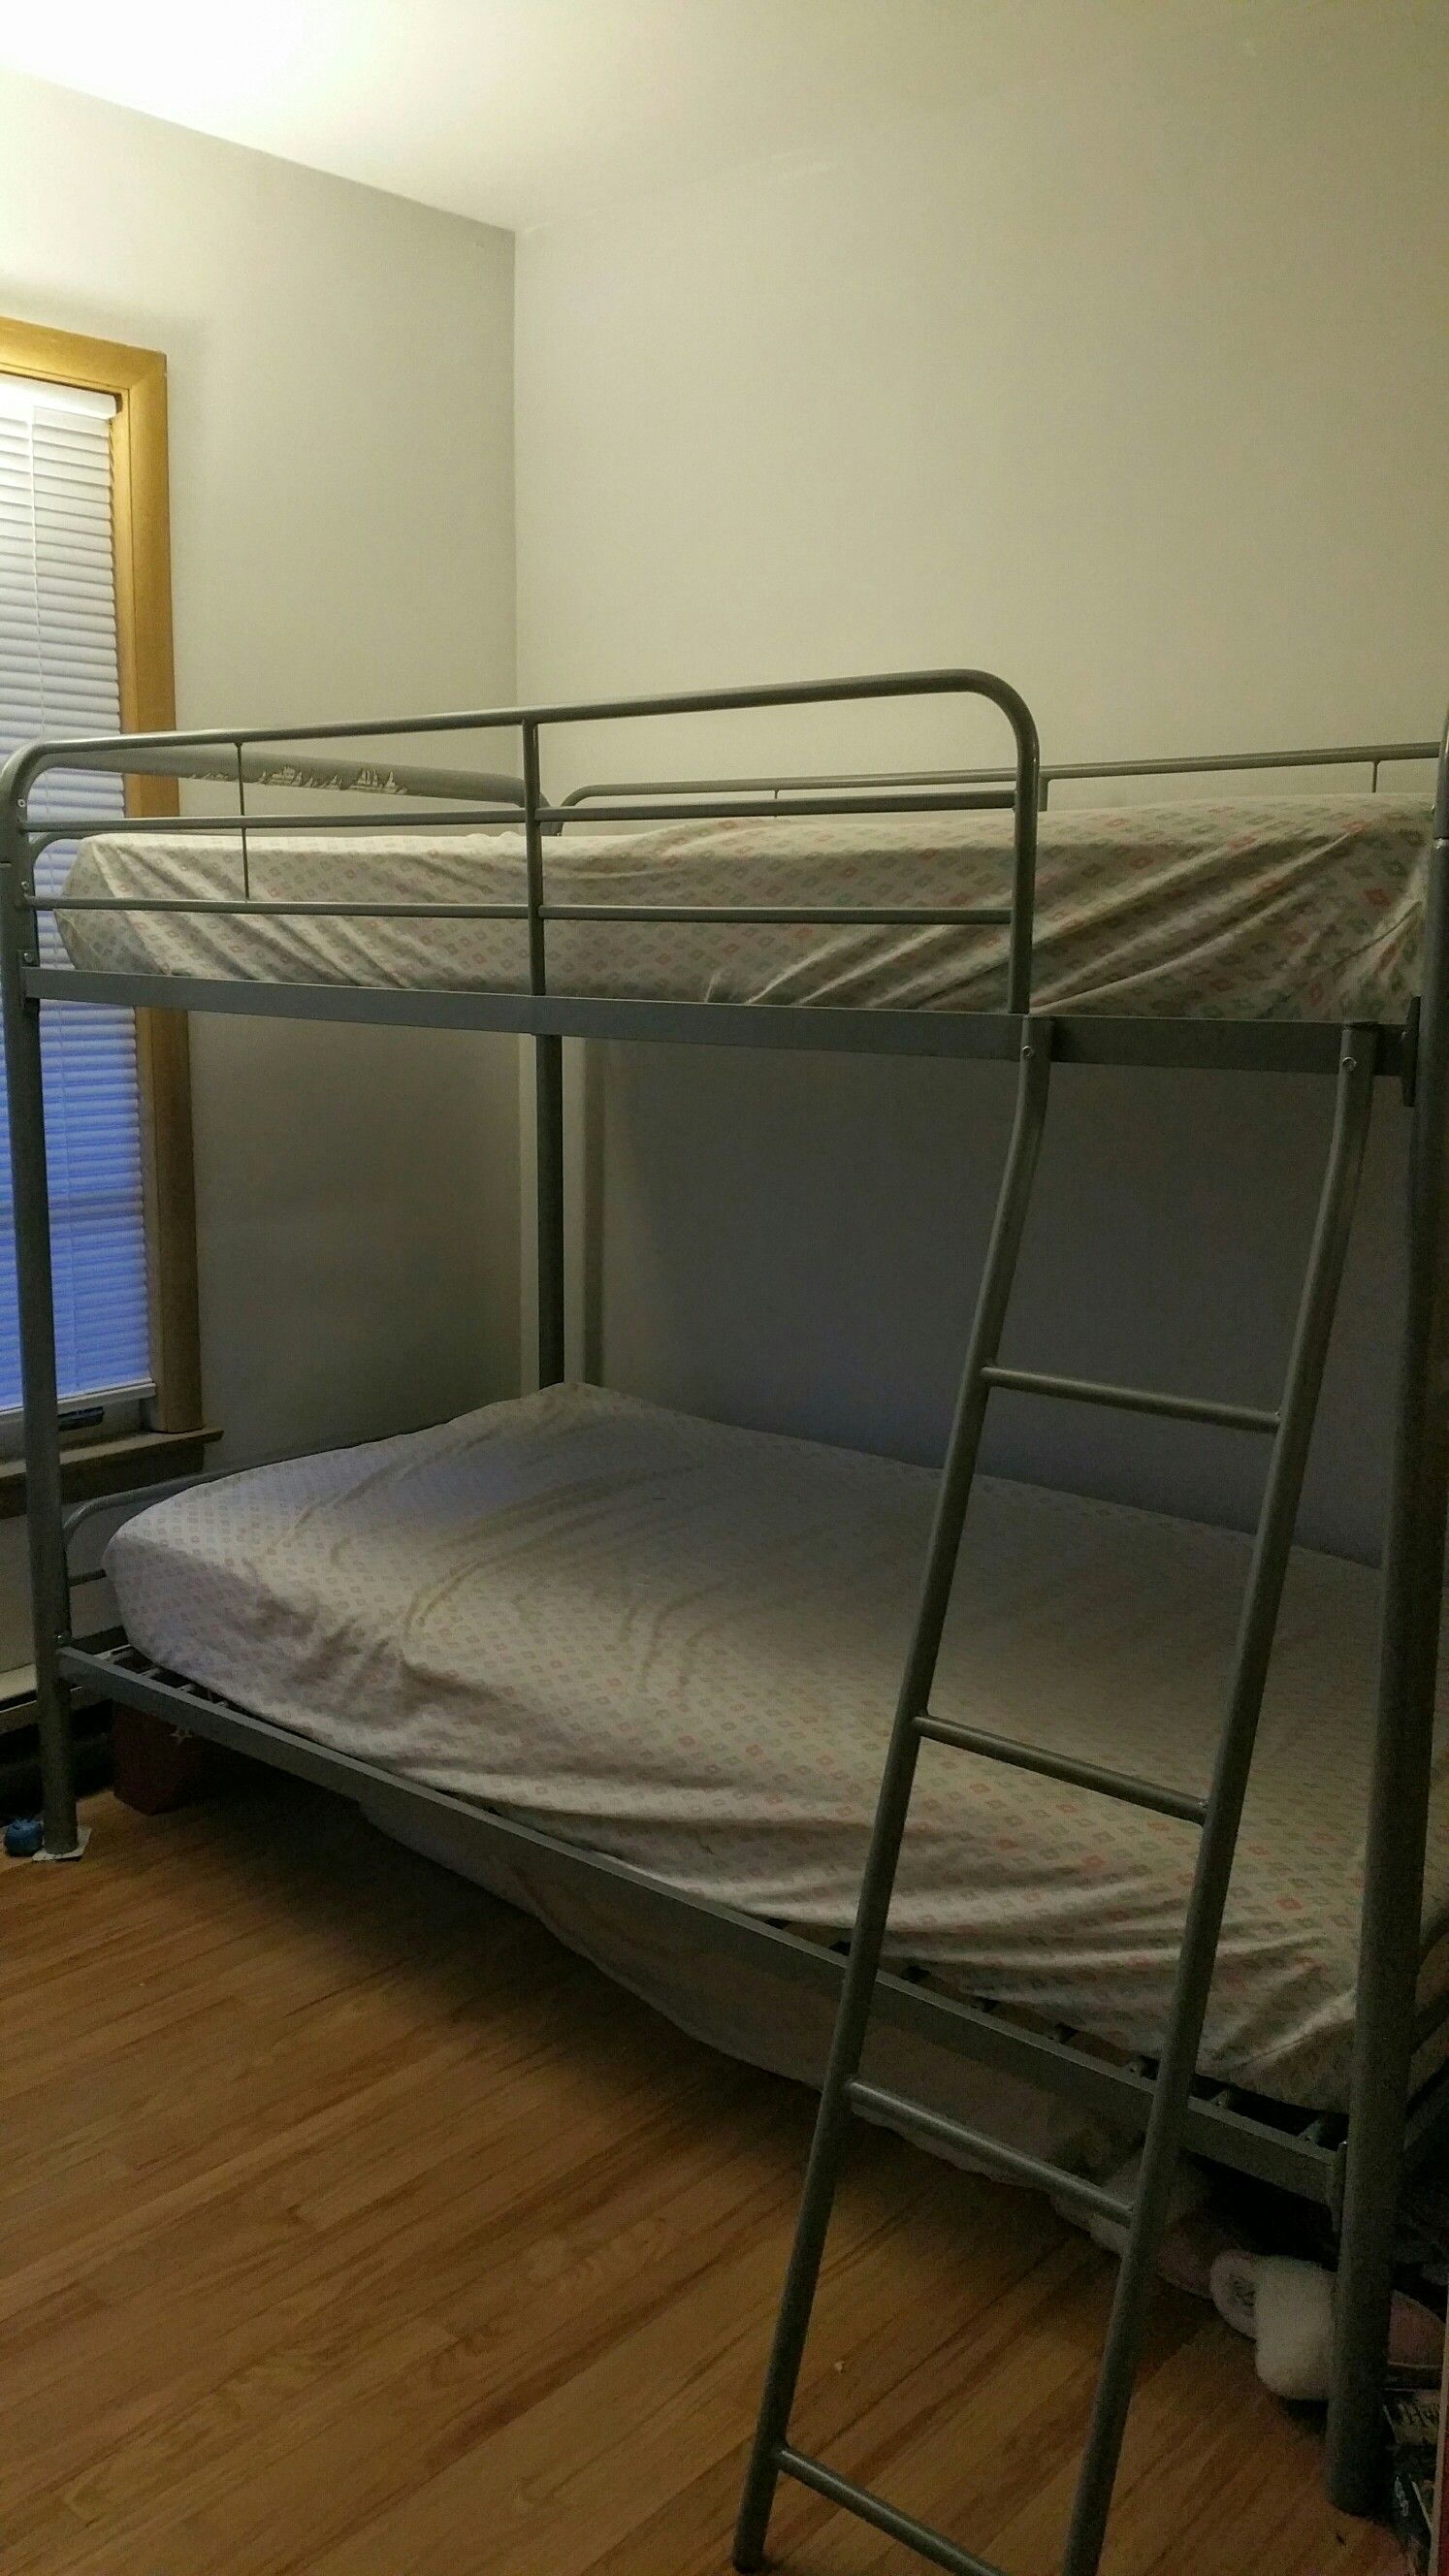 Bunk twin beds